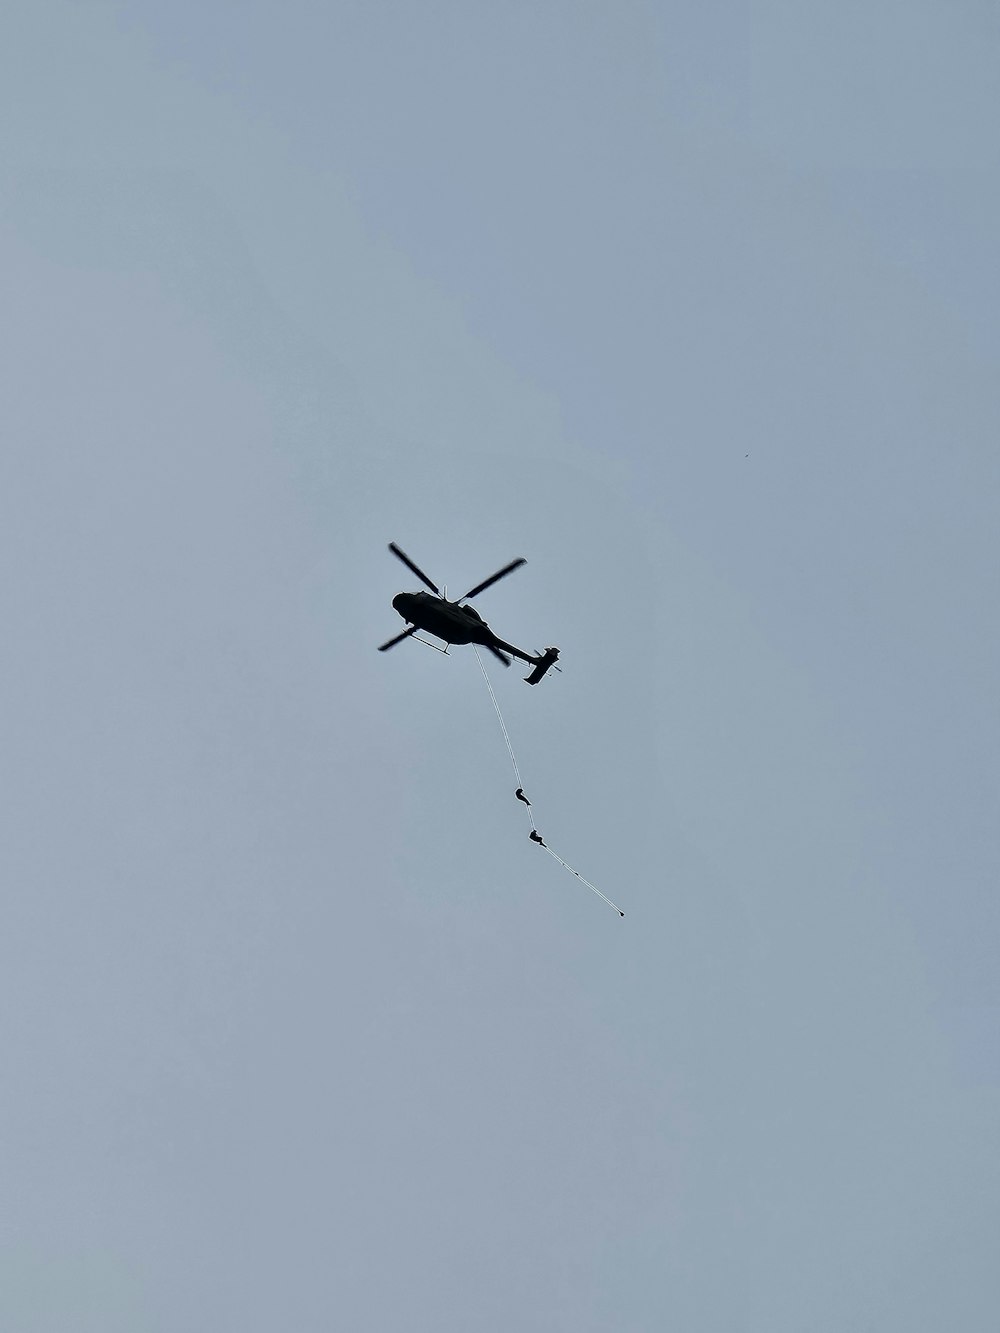 a helicopter flying in the sky with a parachute